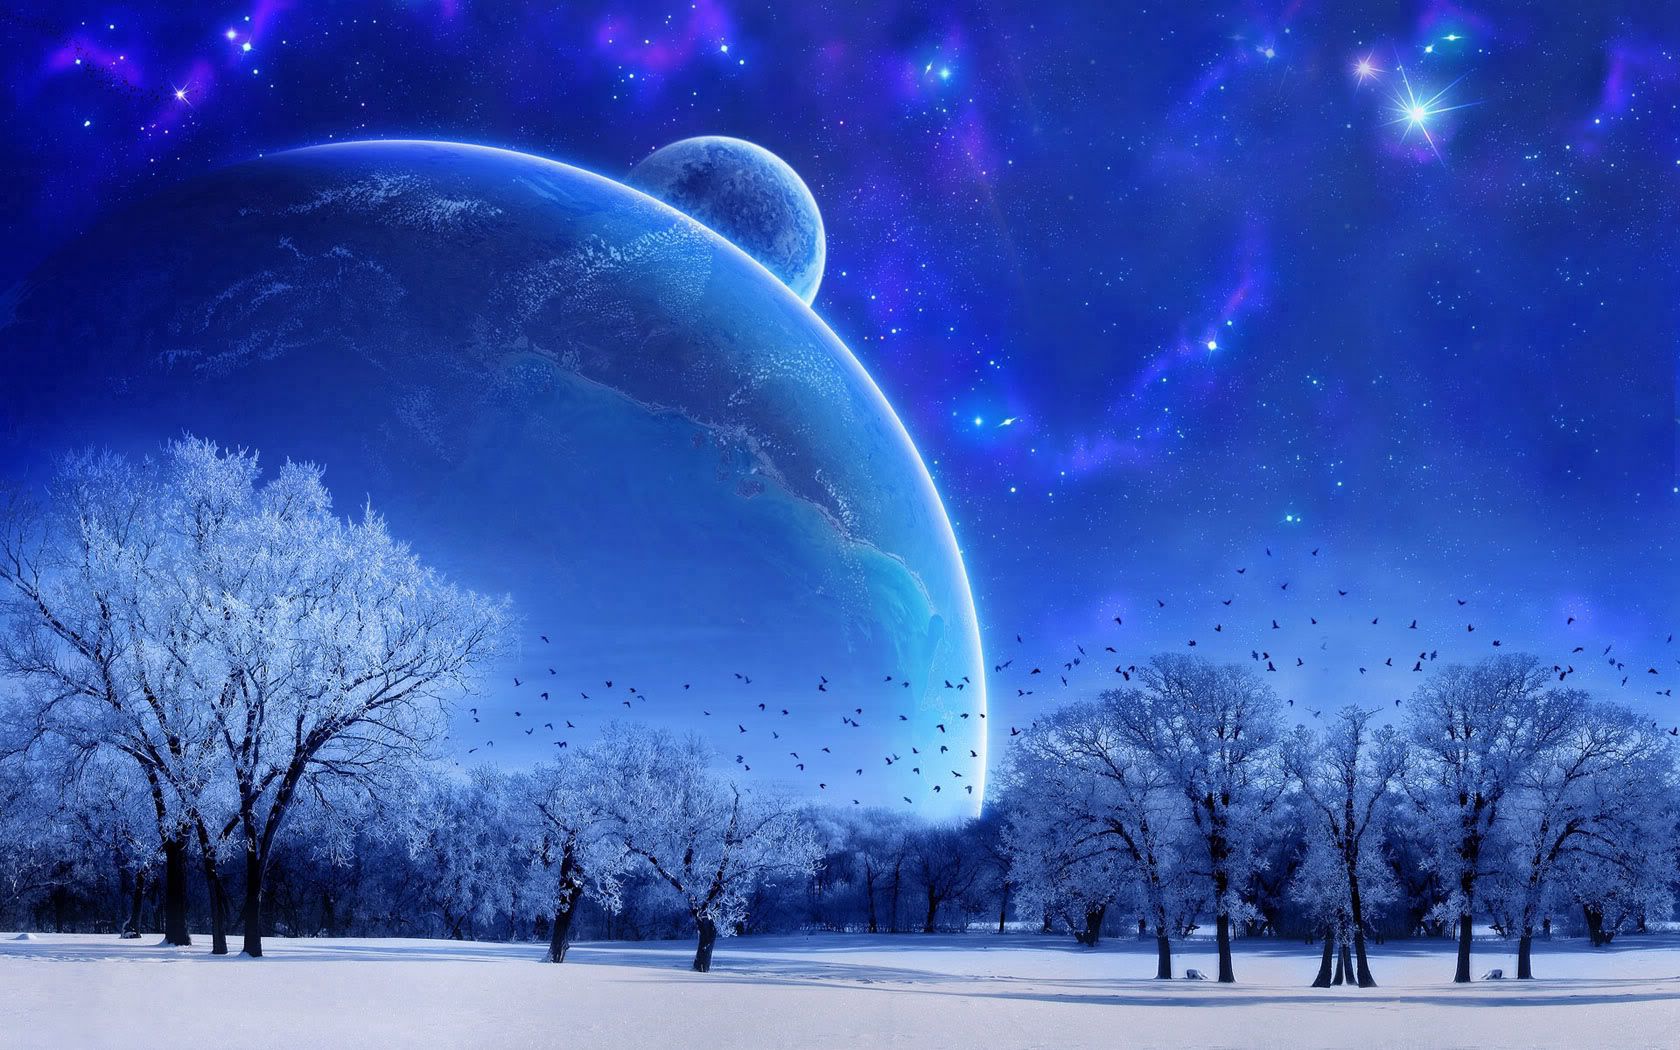 wallpapers sky, landscape, nature, abstract, full moon, snow, winter, birds, trees, evening